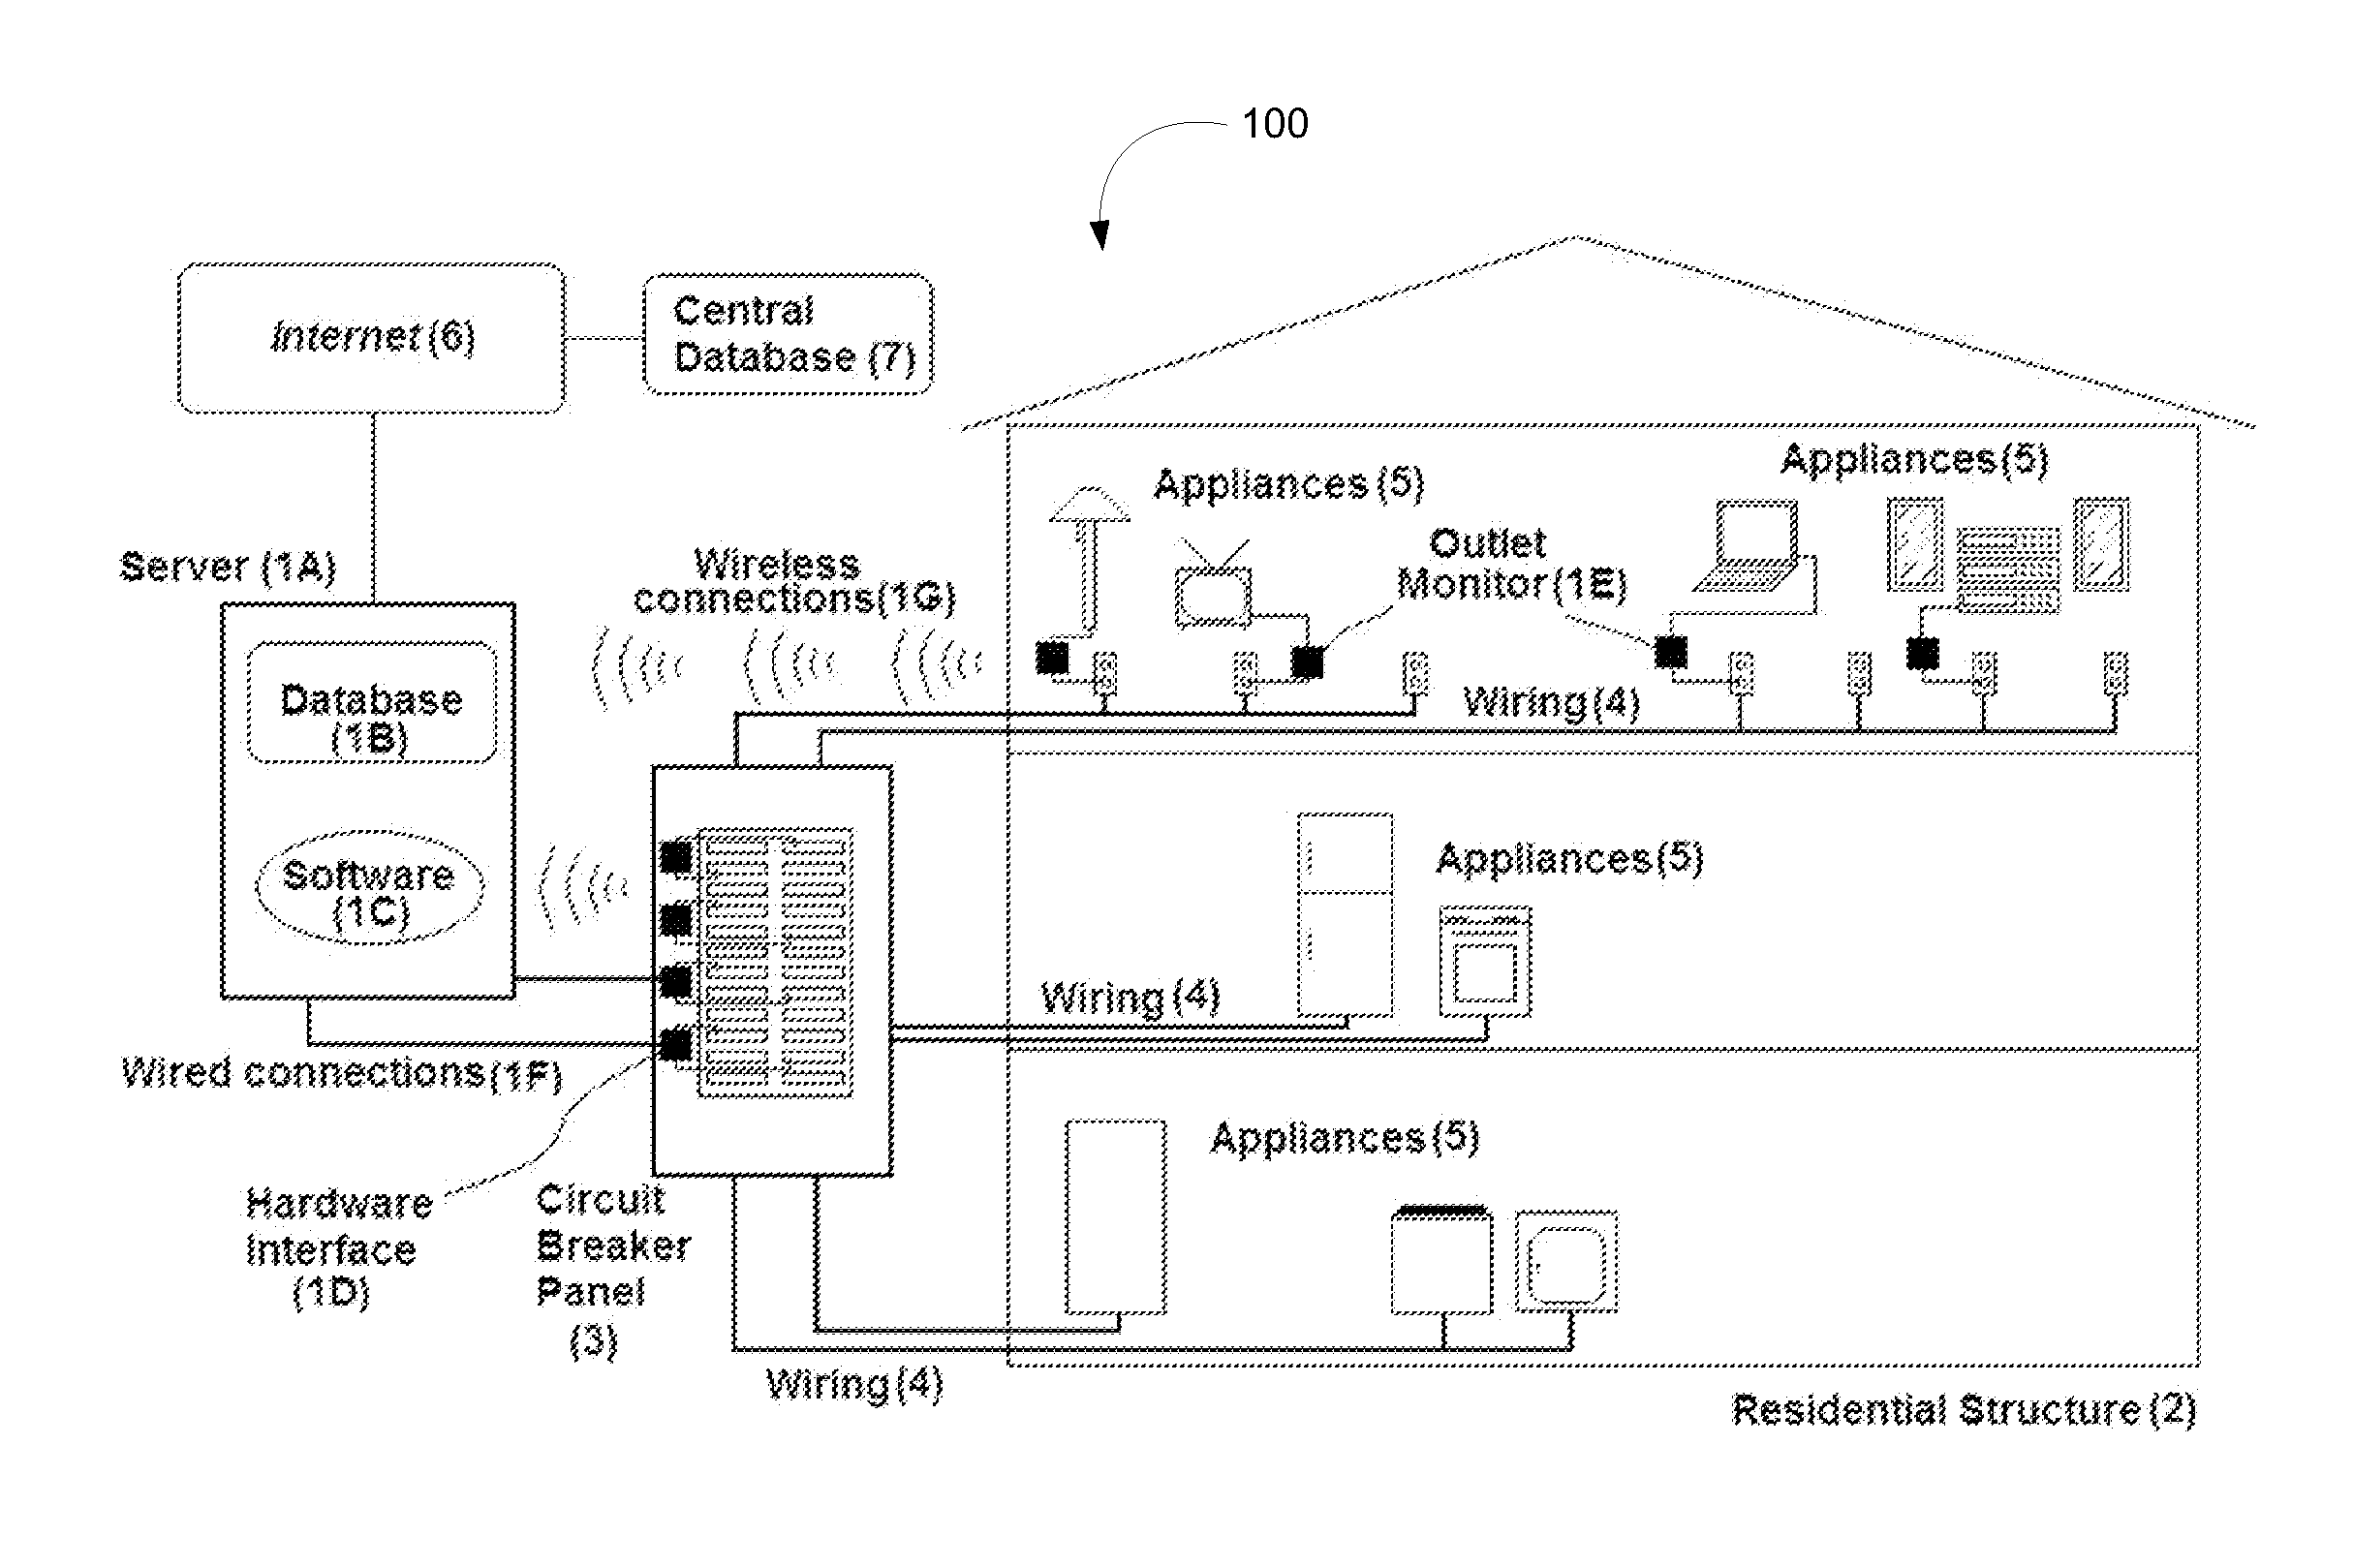 System and method to monitor and manage performance of appliances